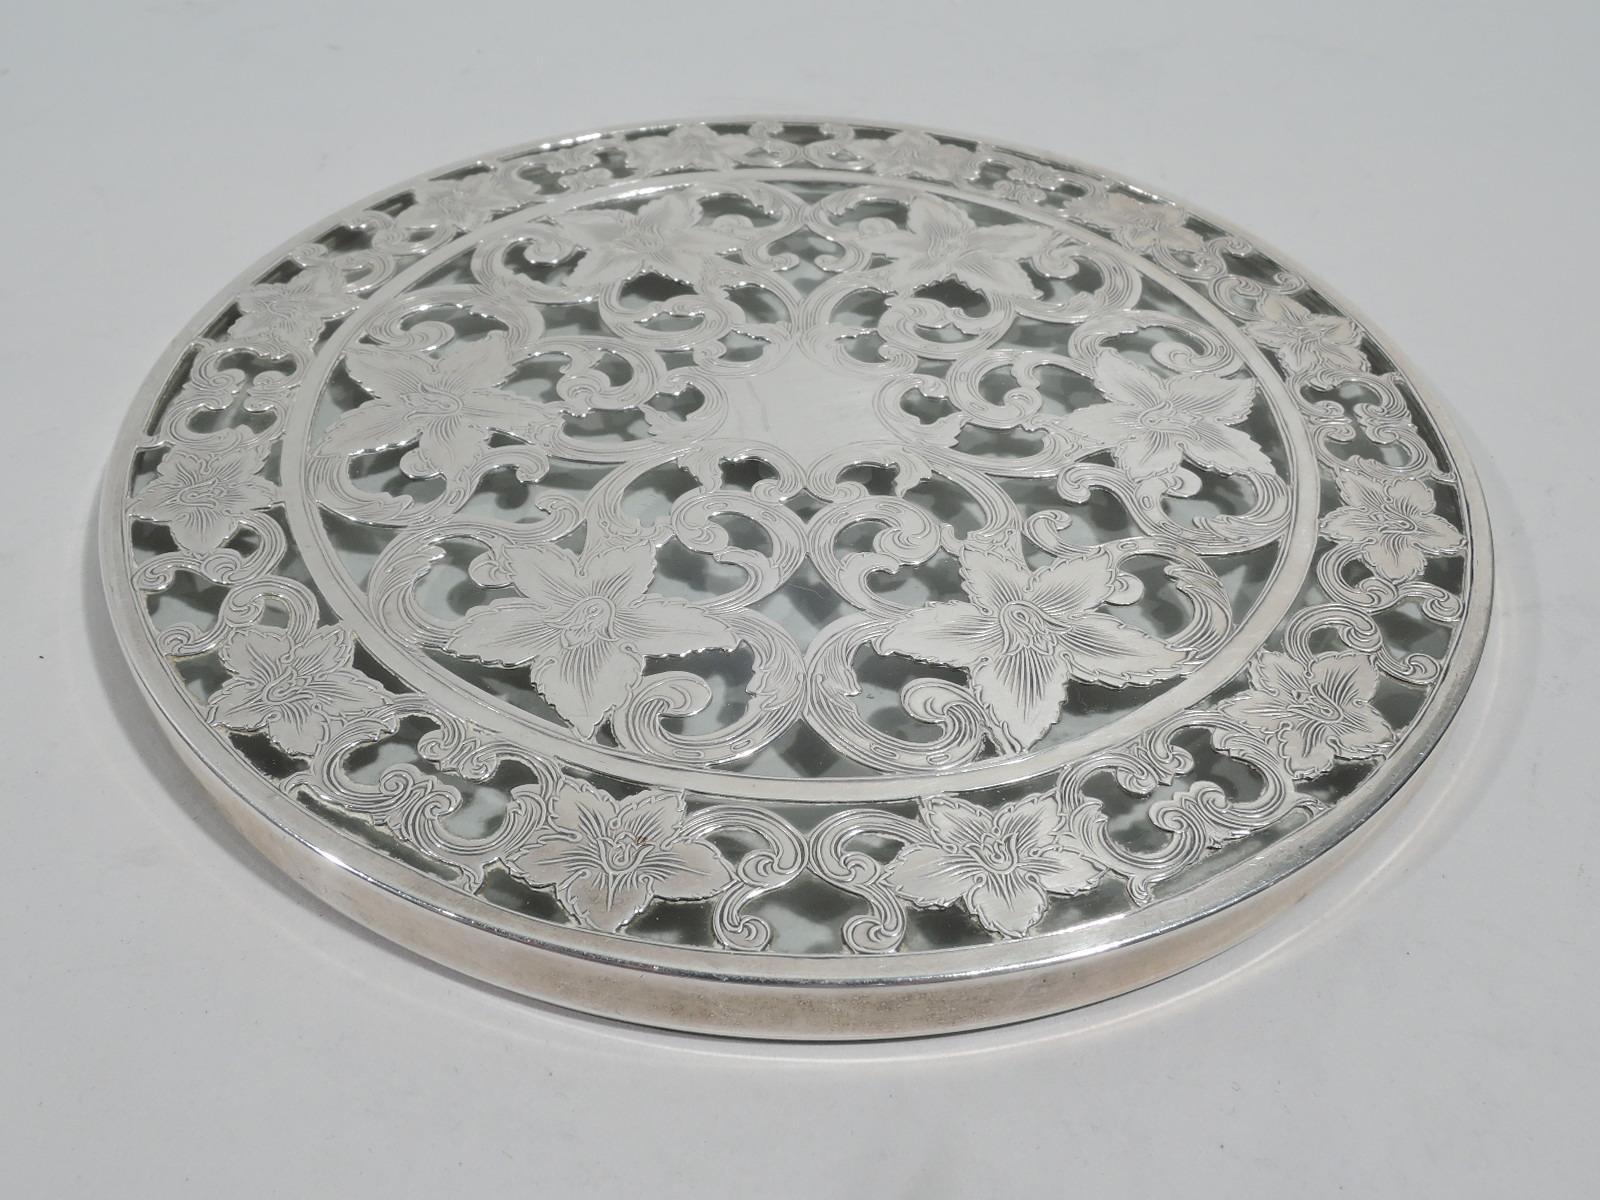 Set of 6 turn-of-the-century Art Nouveau glass trivets with engraved silver overlay. Made by Webster in North Attleboro. Each: Flat and circular; central 6-point star (vacant) surrounded by dense scrolls and flowers; border same. Glass is clear.